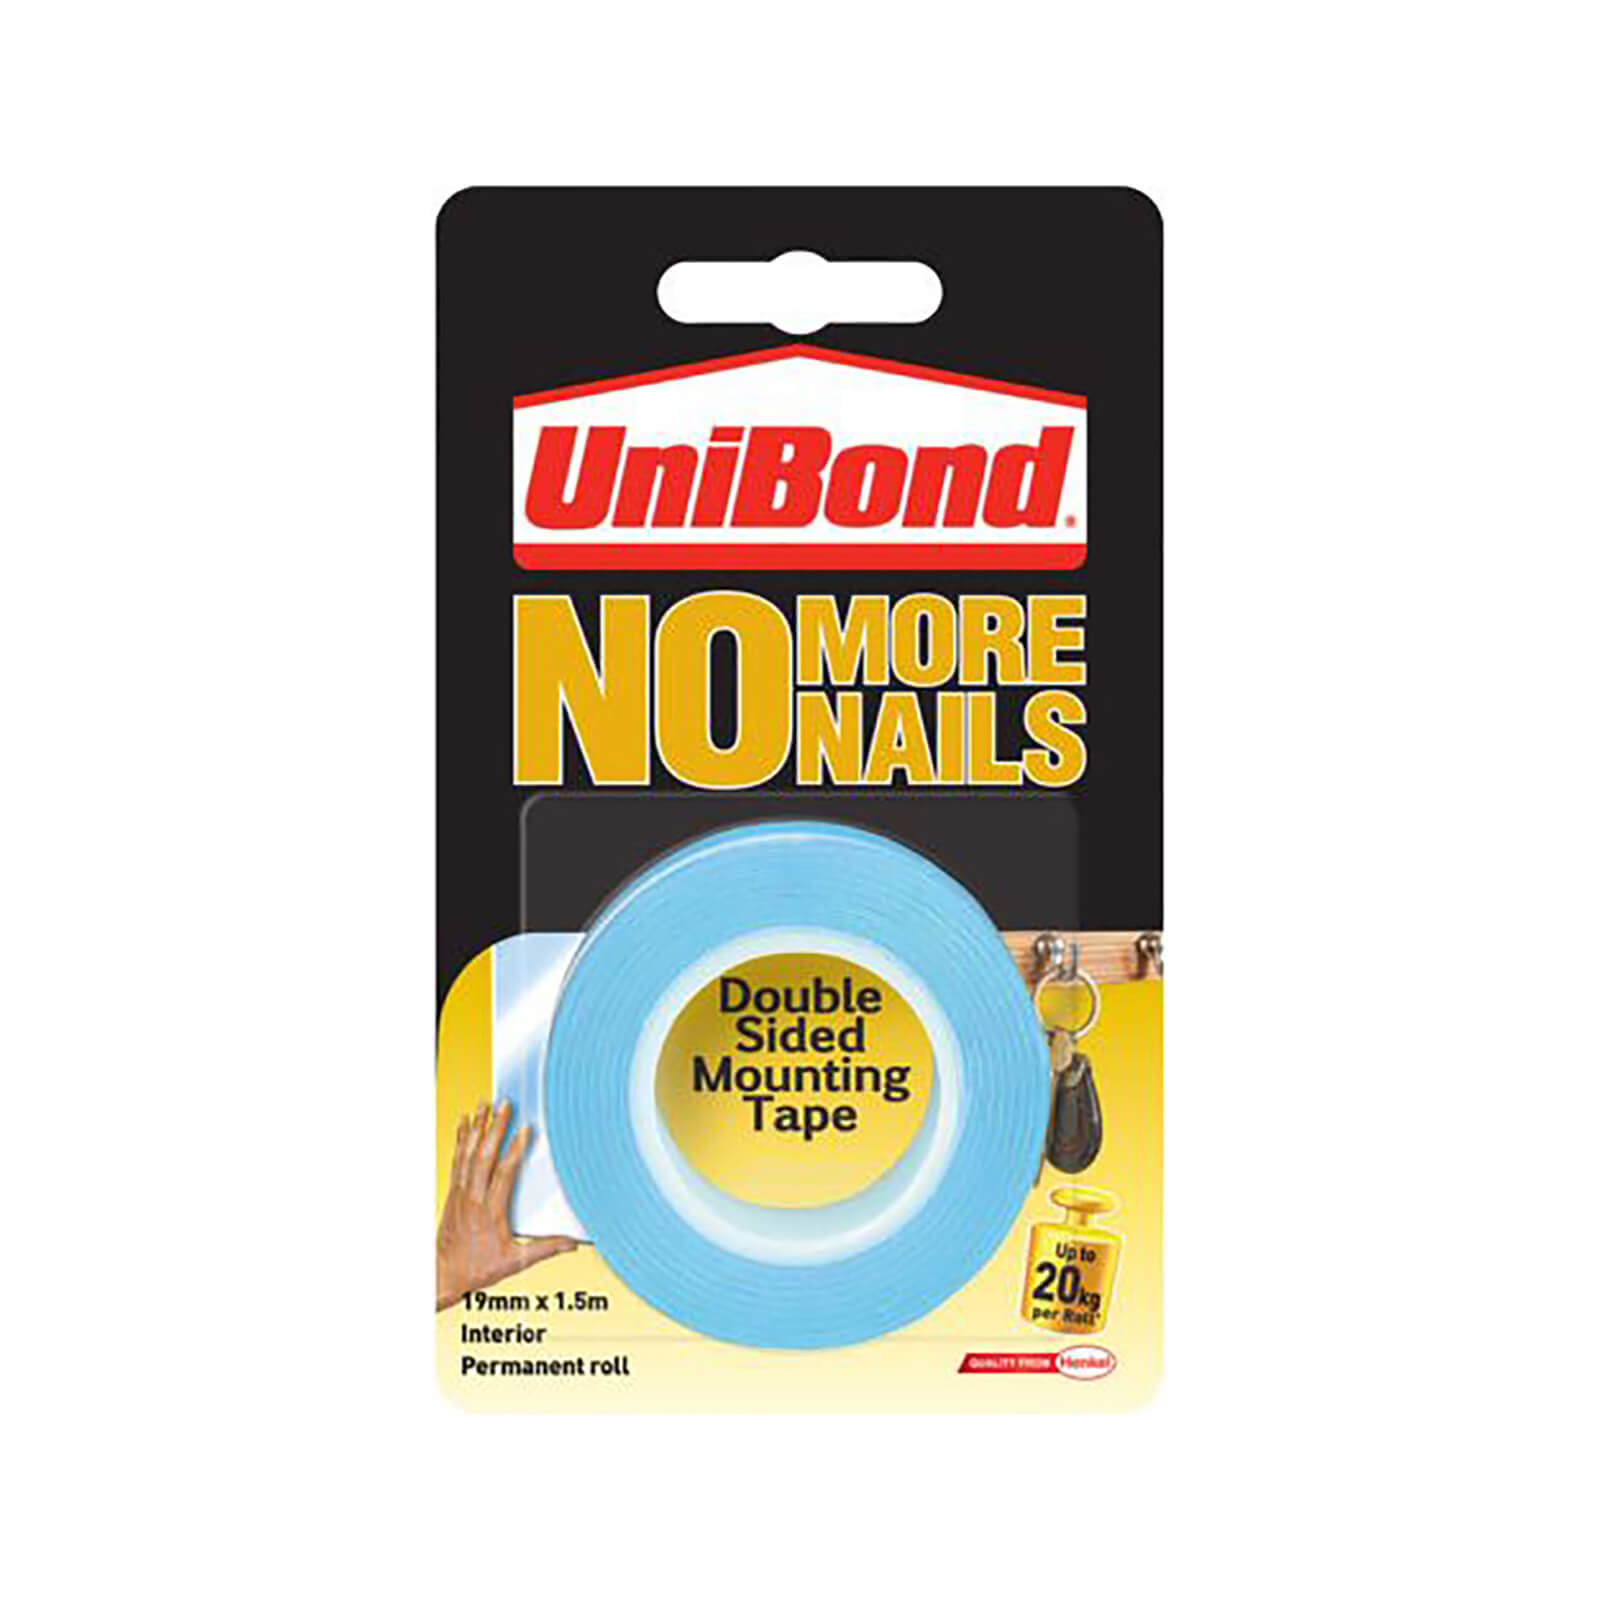 Unibond No More Nails Double Sided Mounting Tape Translucent - 19mm x 1.5m